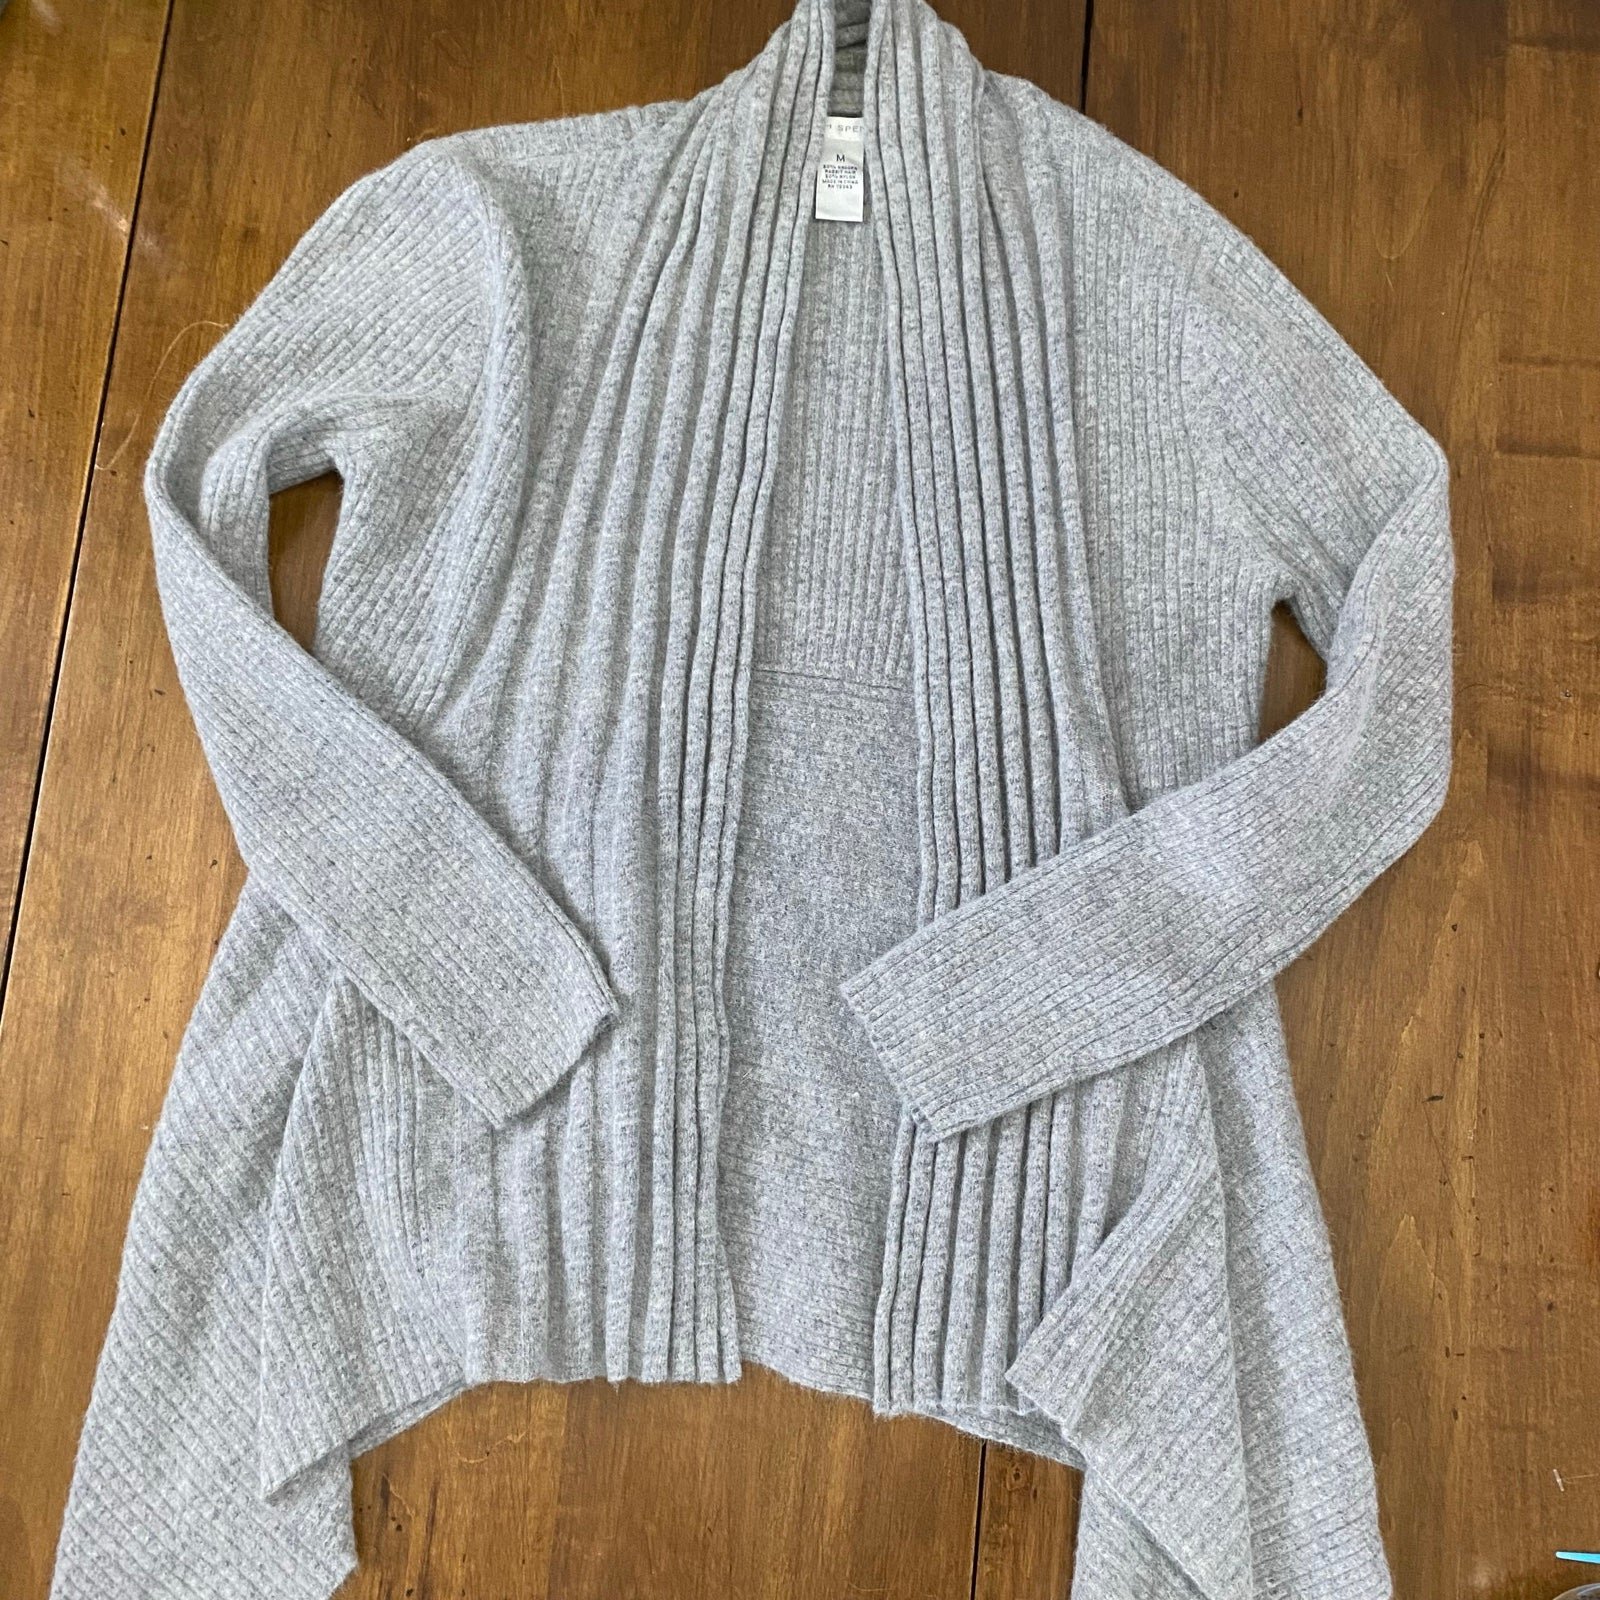 Great Sarah Spencer Angora Blend Open Front Waterfall Sweater Cardigan Women´s M IMY9dImPo New Style